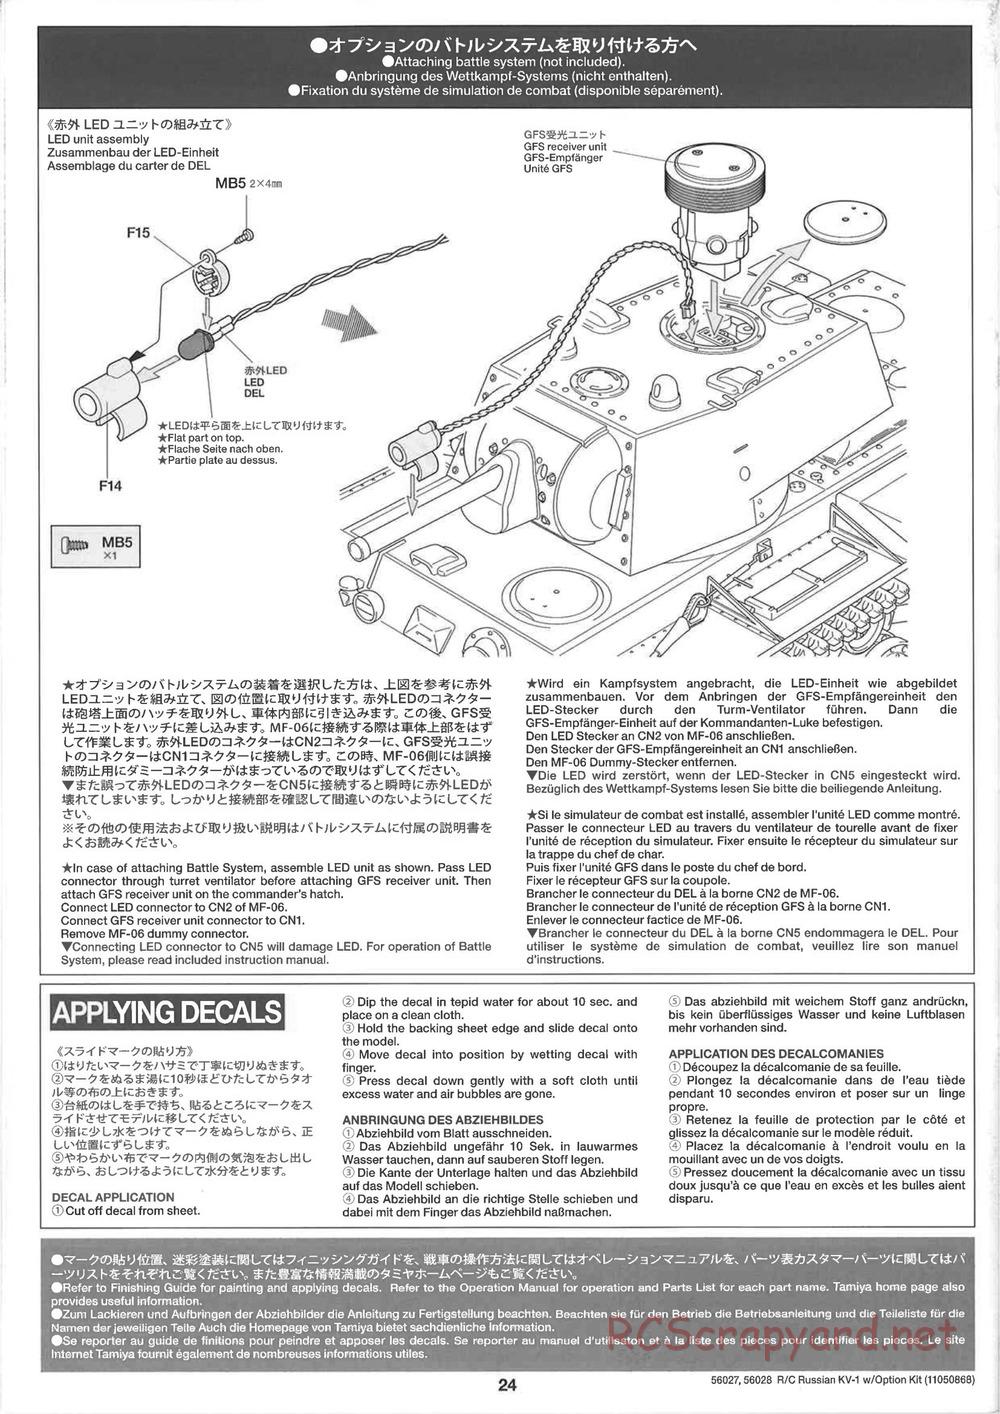 Tamiya - Russian Heavy Tank KV-1 - 1/16 Scale Chassis - Manual - Page 24